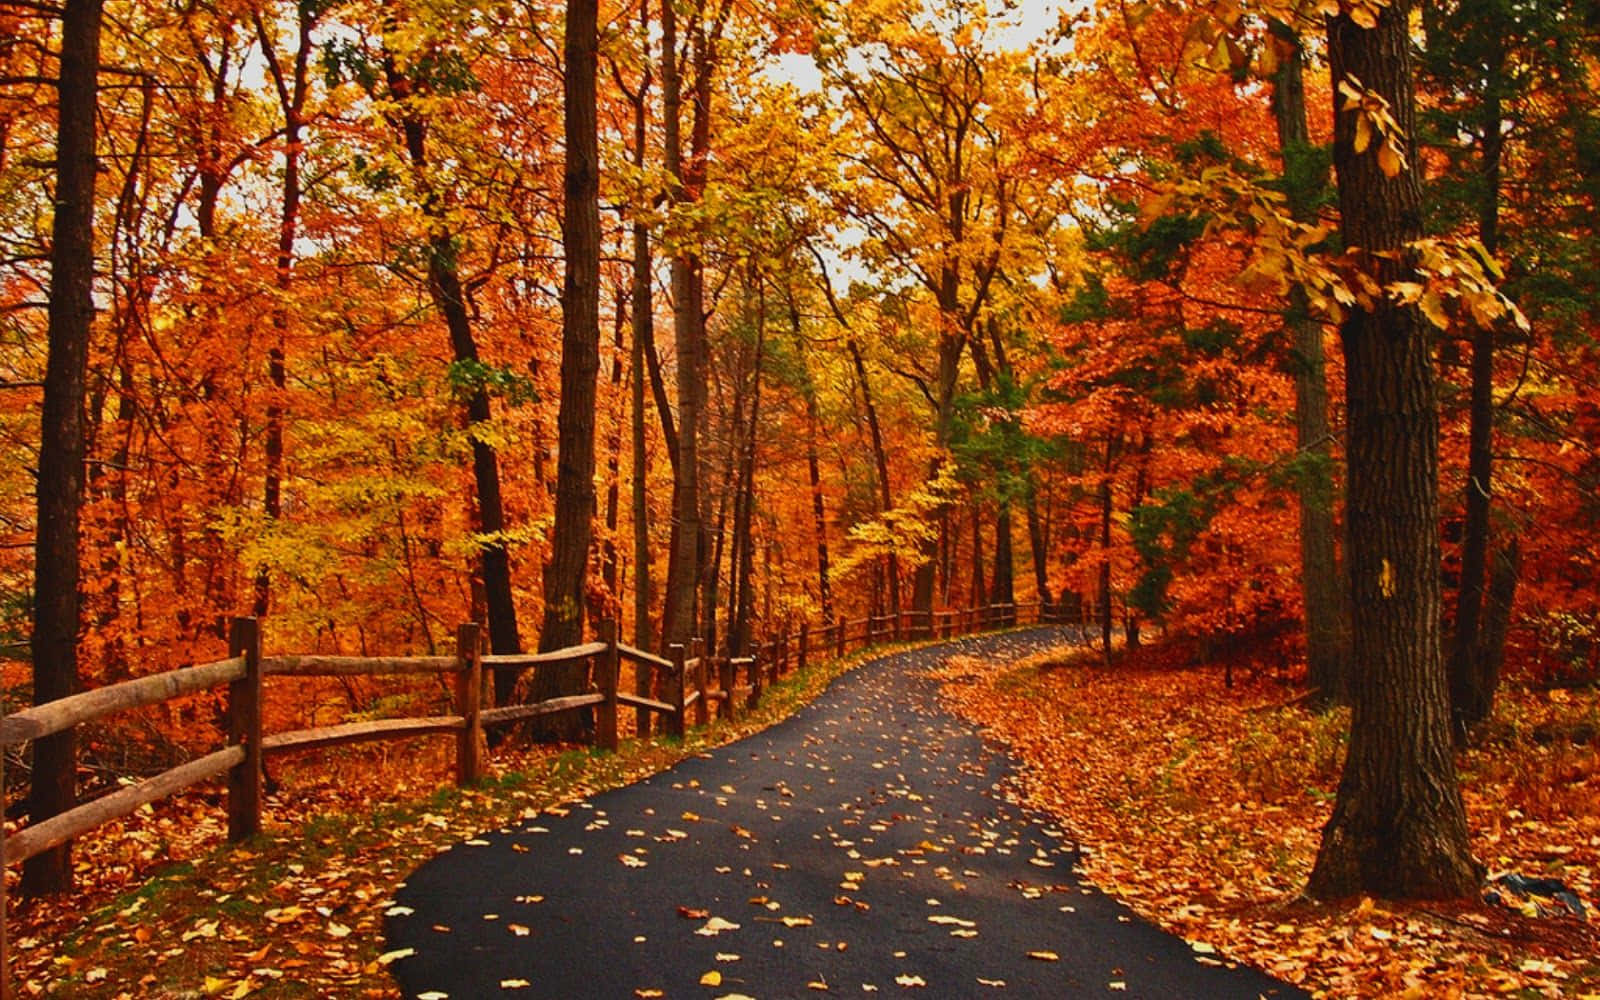 Enjoy the beautiful foliage of fall during October